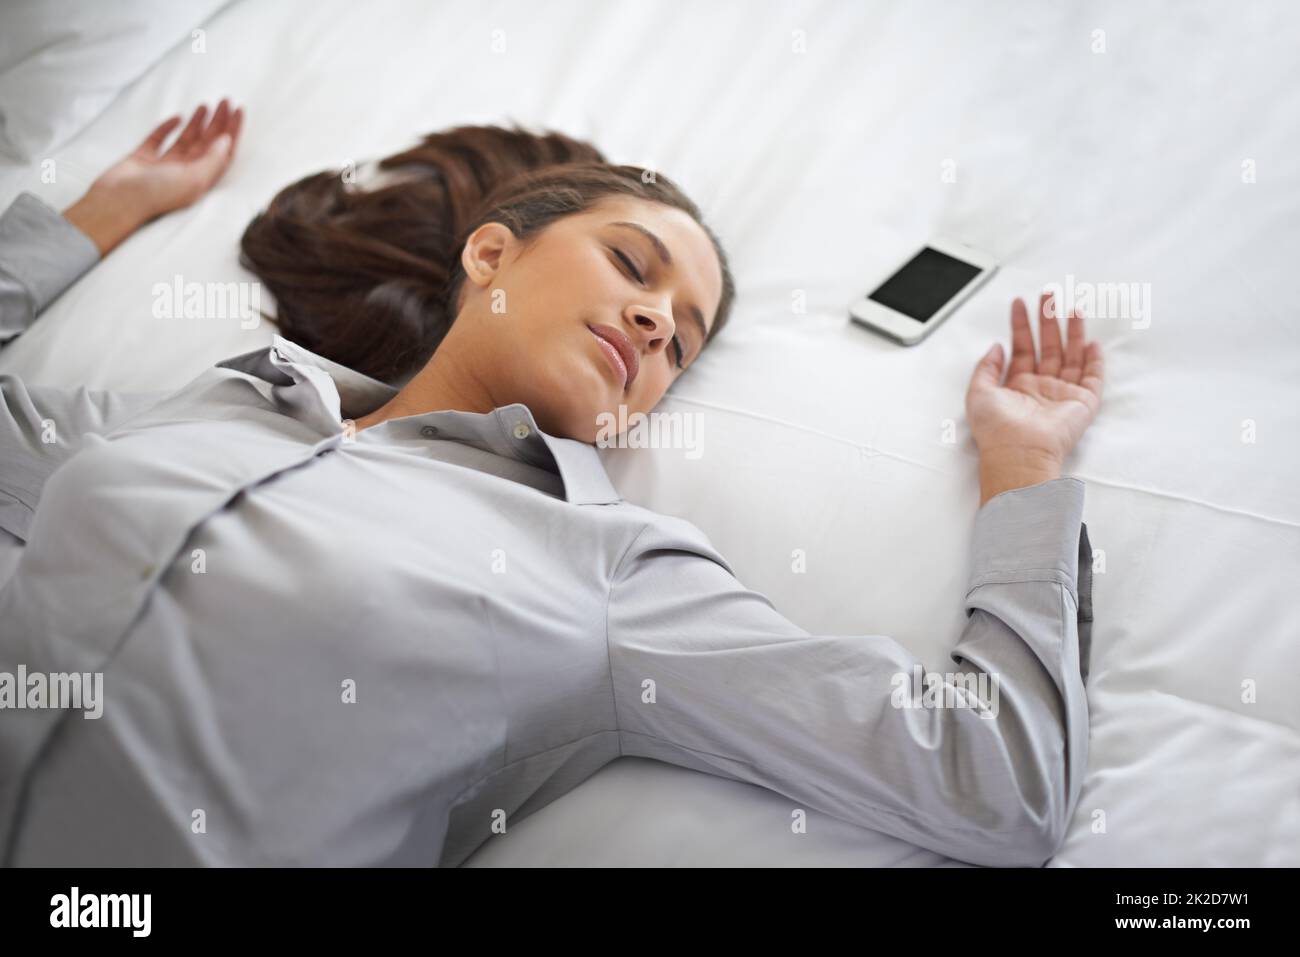 No more work today. Shot of a young businesswoman passed out on a bed with her cellphone beside here. Stock Photo